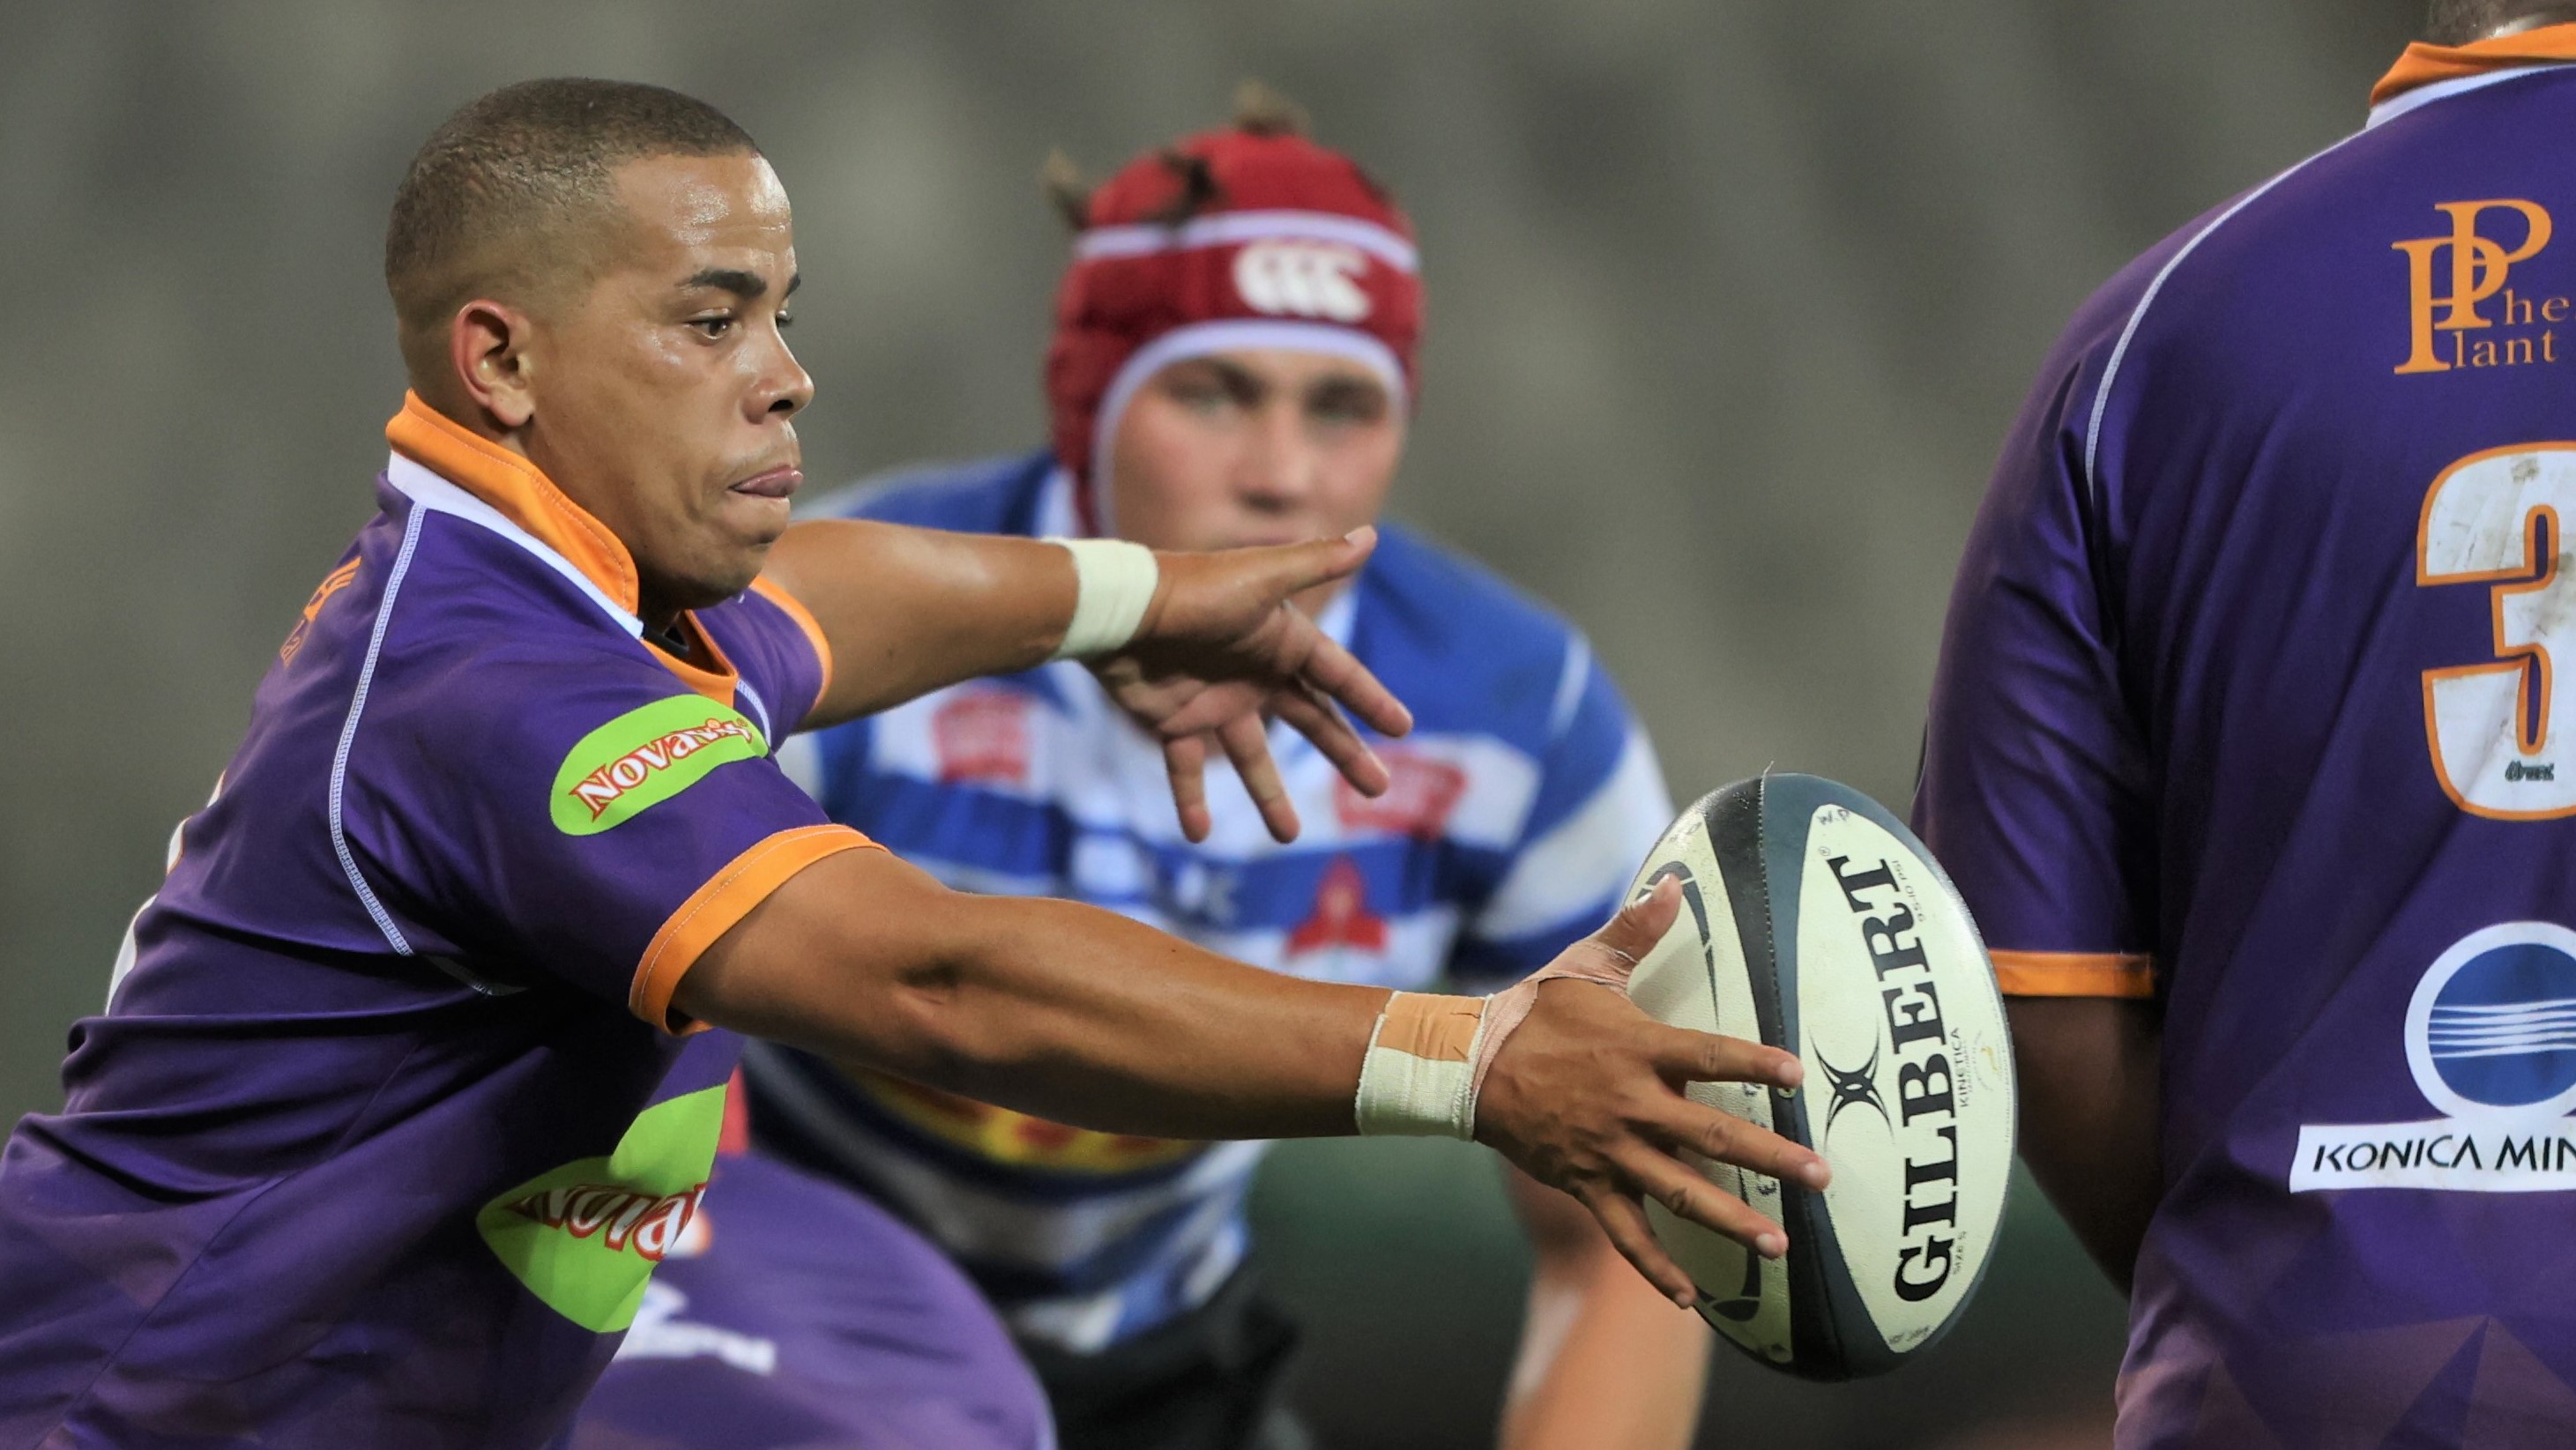 CAPE TOWN, SOUTH AFRICA - APRIL 08: Jaywinn Juries of Griffons during the Currie Cup, Premier Division match between DHL Western Province and NovaVit Griffons at DHL Stadium on April 08, 2023 in Cape Town, South Africa. (Photo by Carl Fourie/Gallo Images)